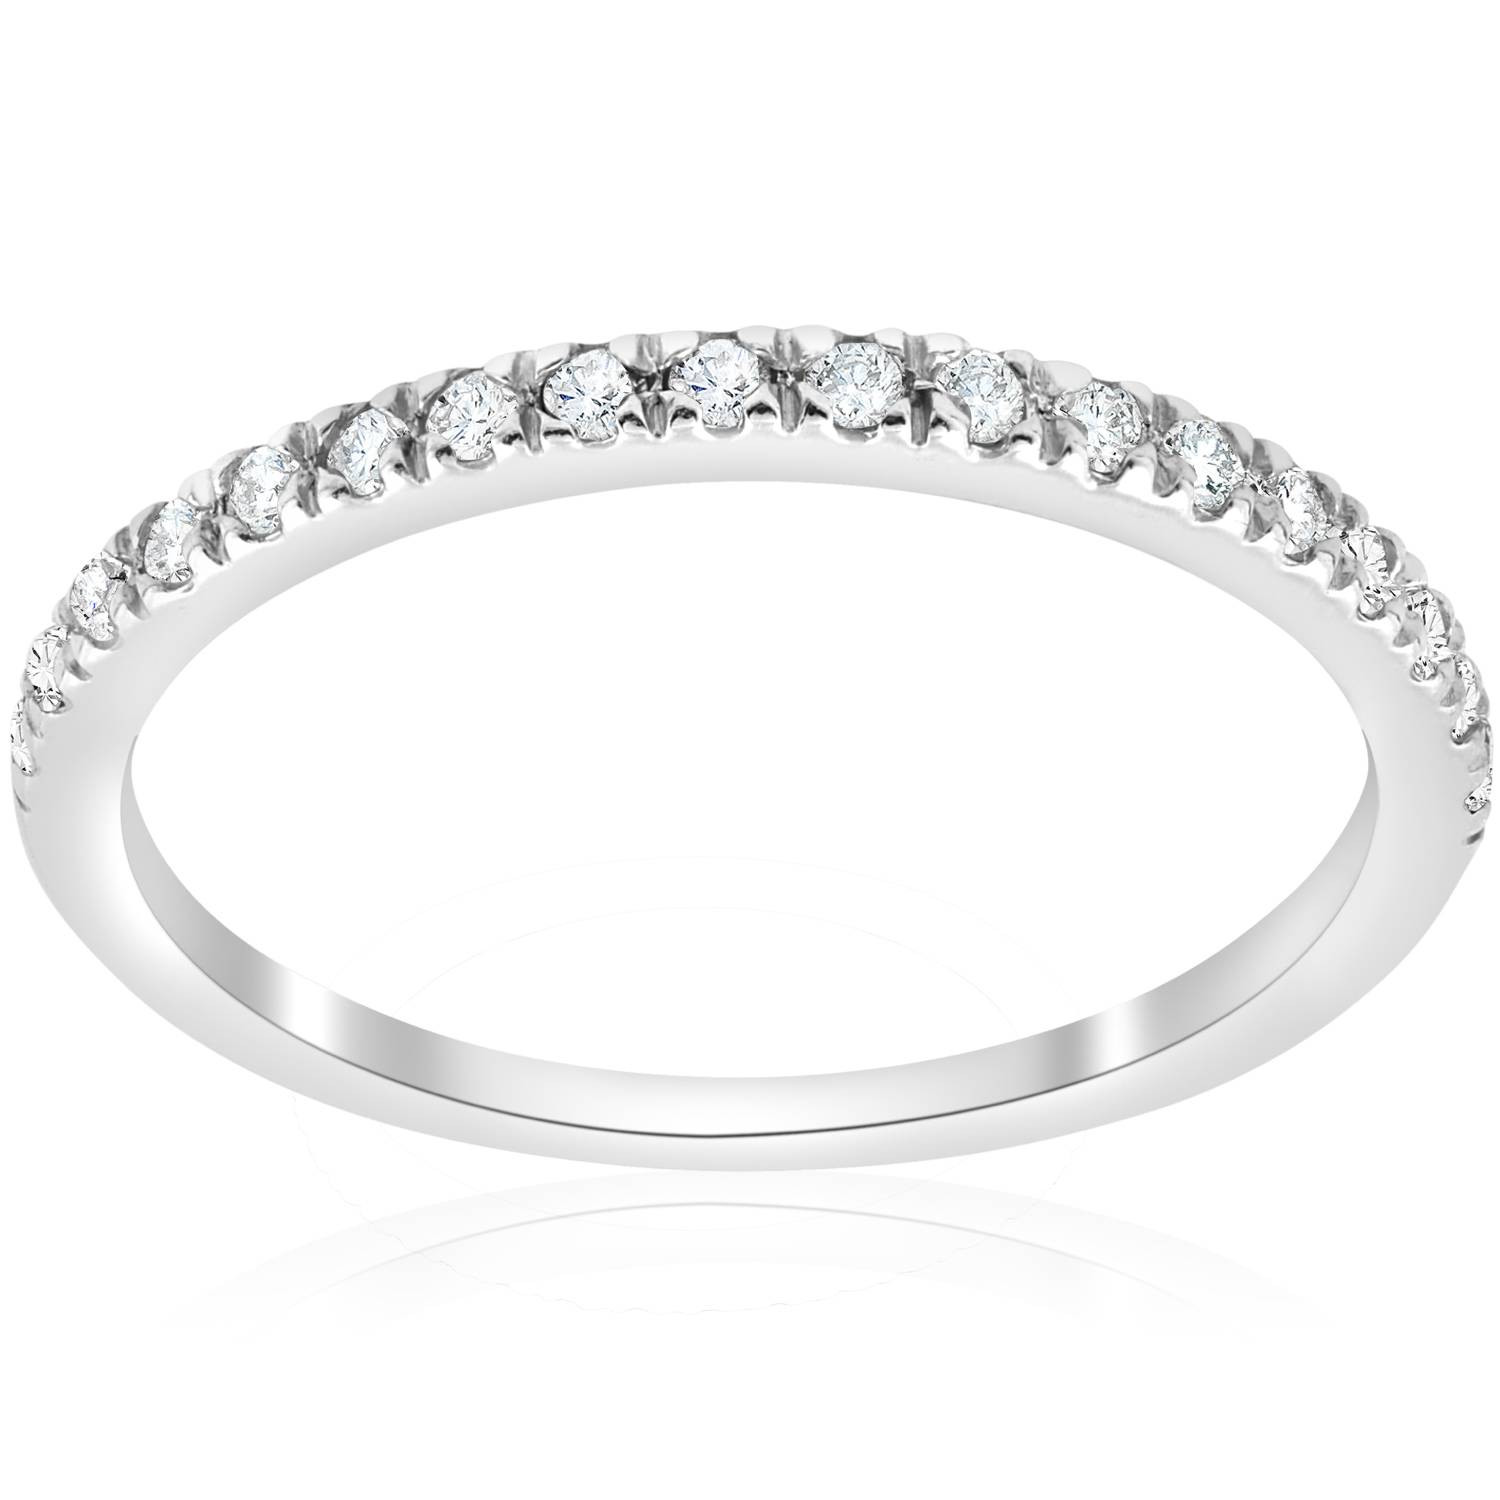 Pave Wedding Band
 1 4 ct Pave Diamond Wedding Pave Ring Womens Stackable